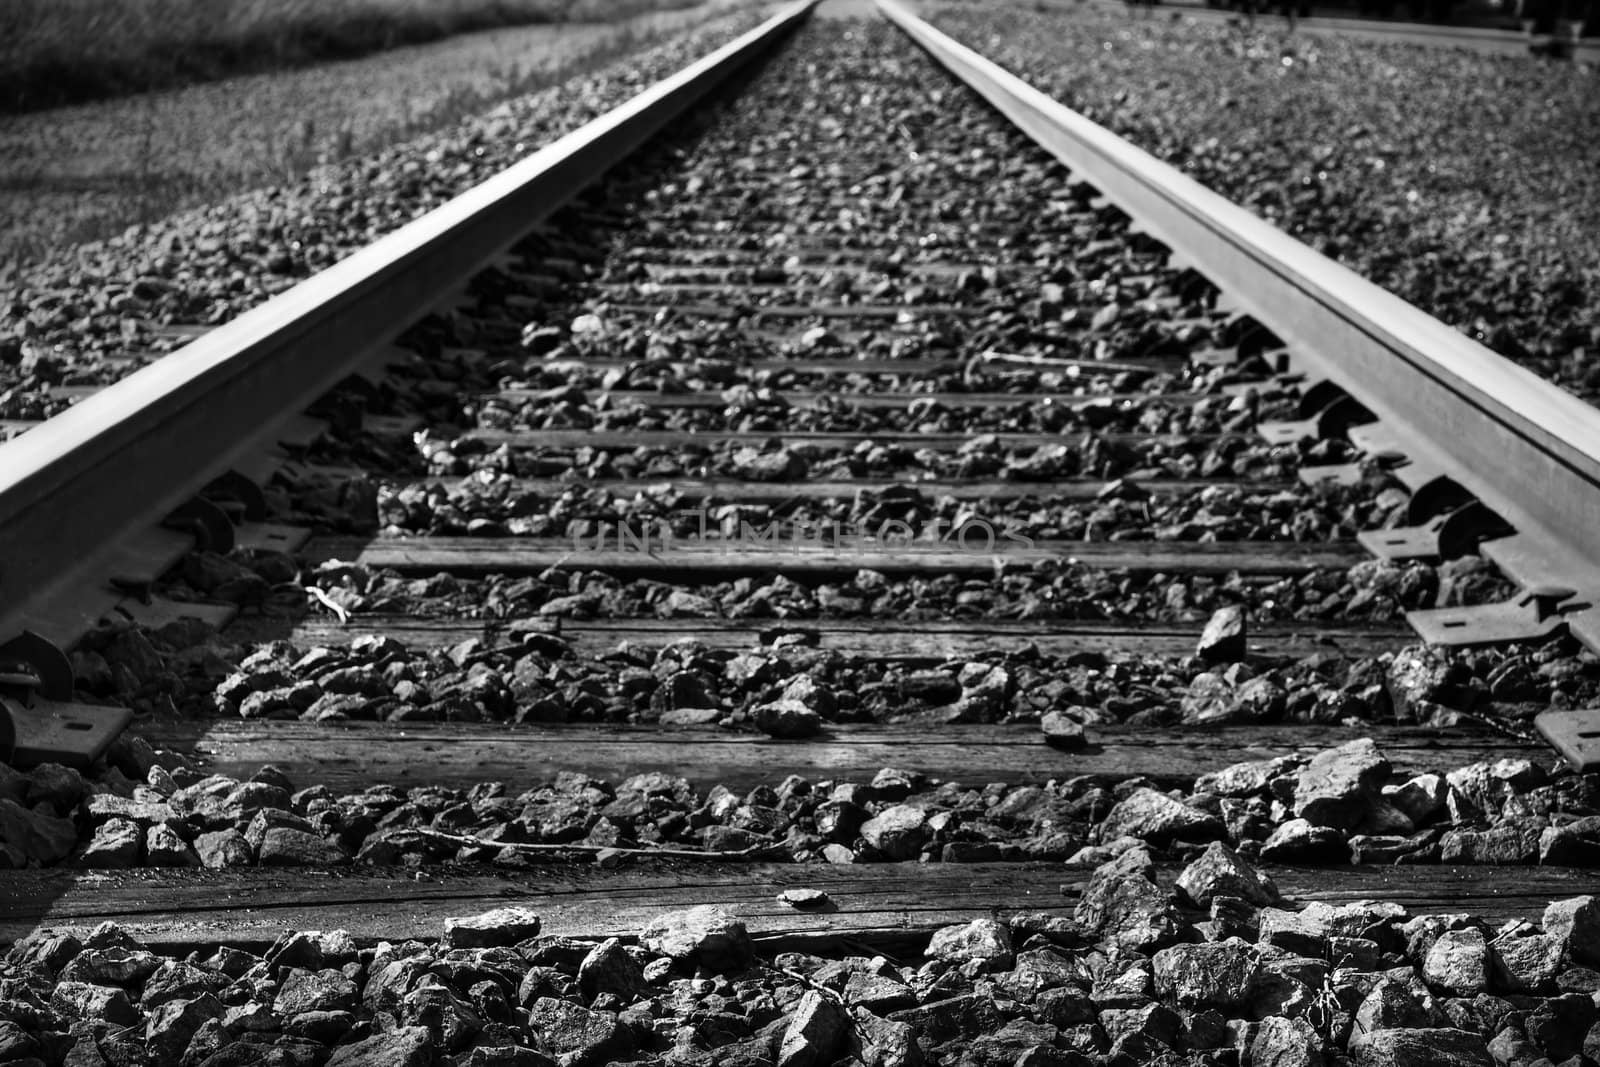 Dramatic black and white rendering of train tracks with diminishing perspective, great background.